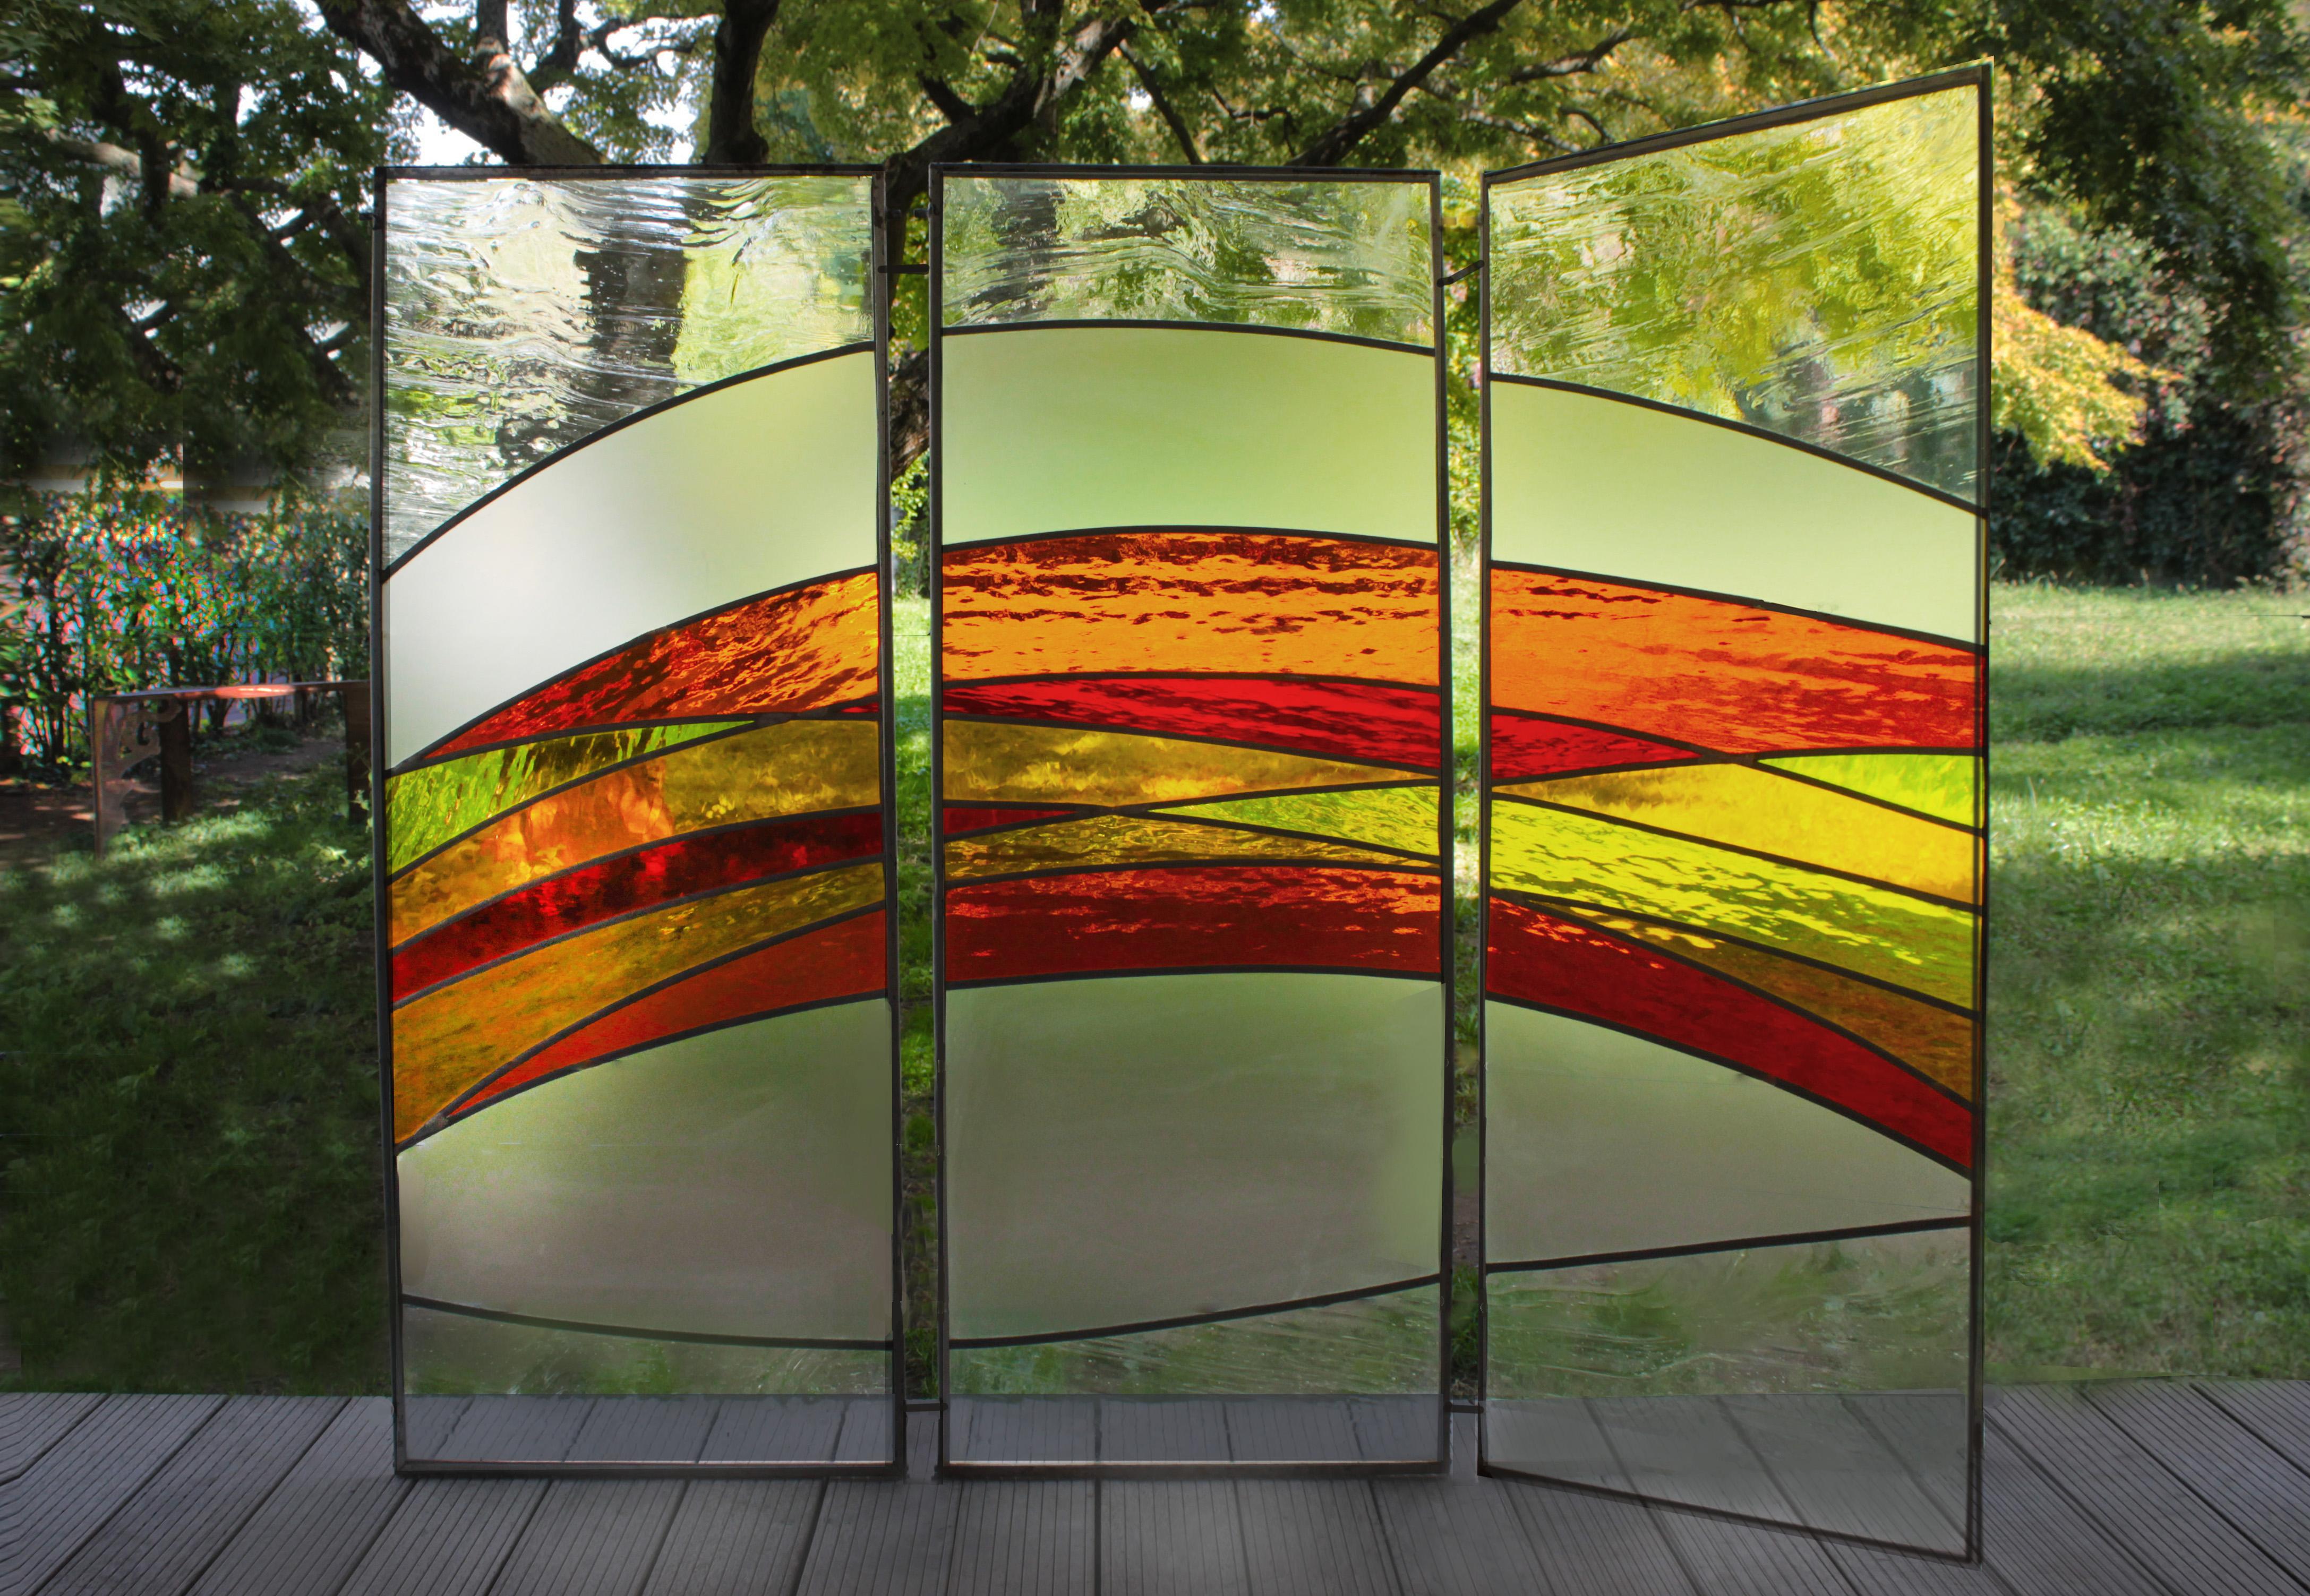 Trio of contemporary artistic stained glasses panels adaptable to the needs of interior design.
Screens, windows, partition panels, decorative panels, design lamps.
The artist-designer Raoul Gilioli designed these stained glass windows inspired by